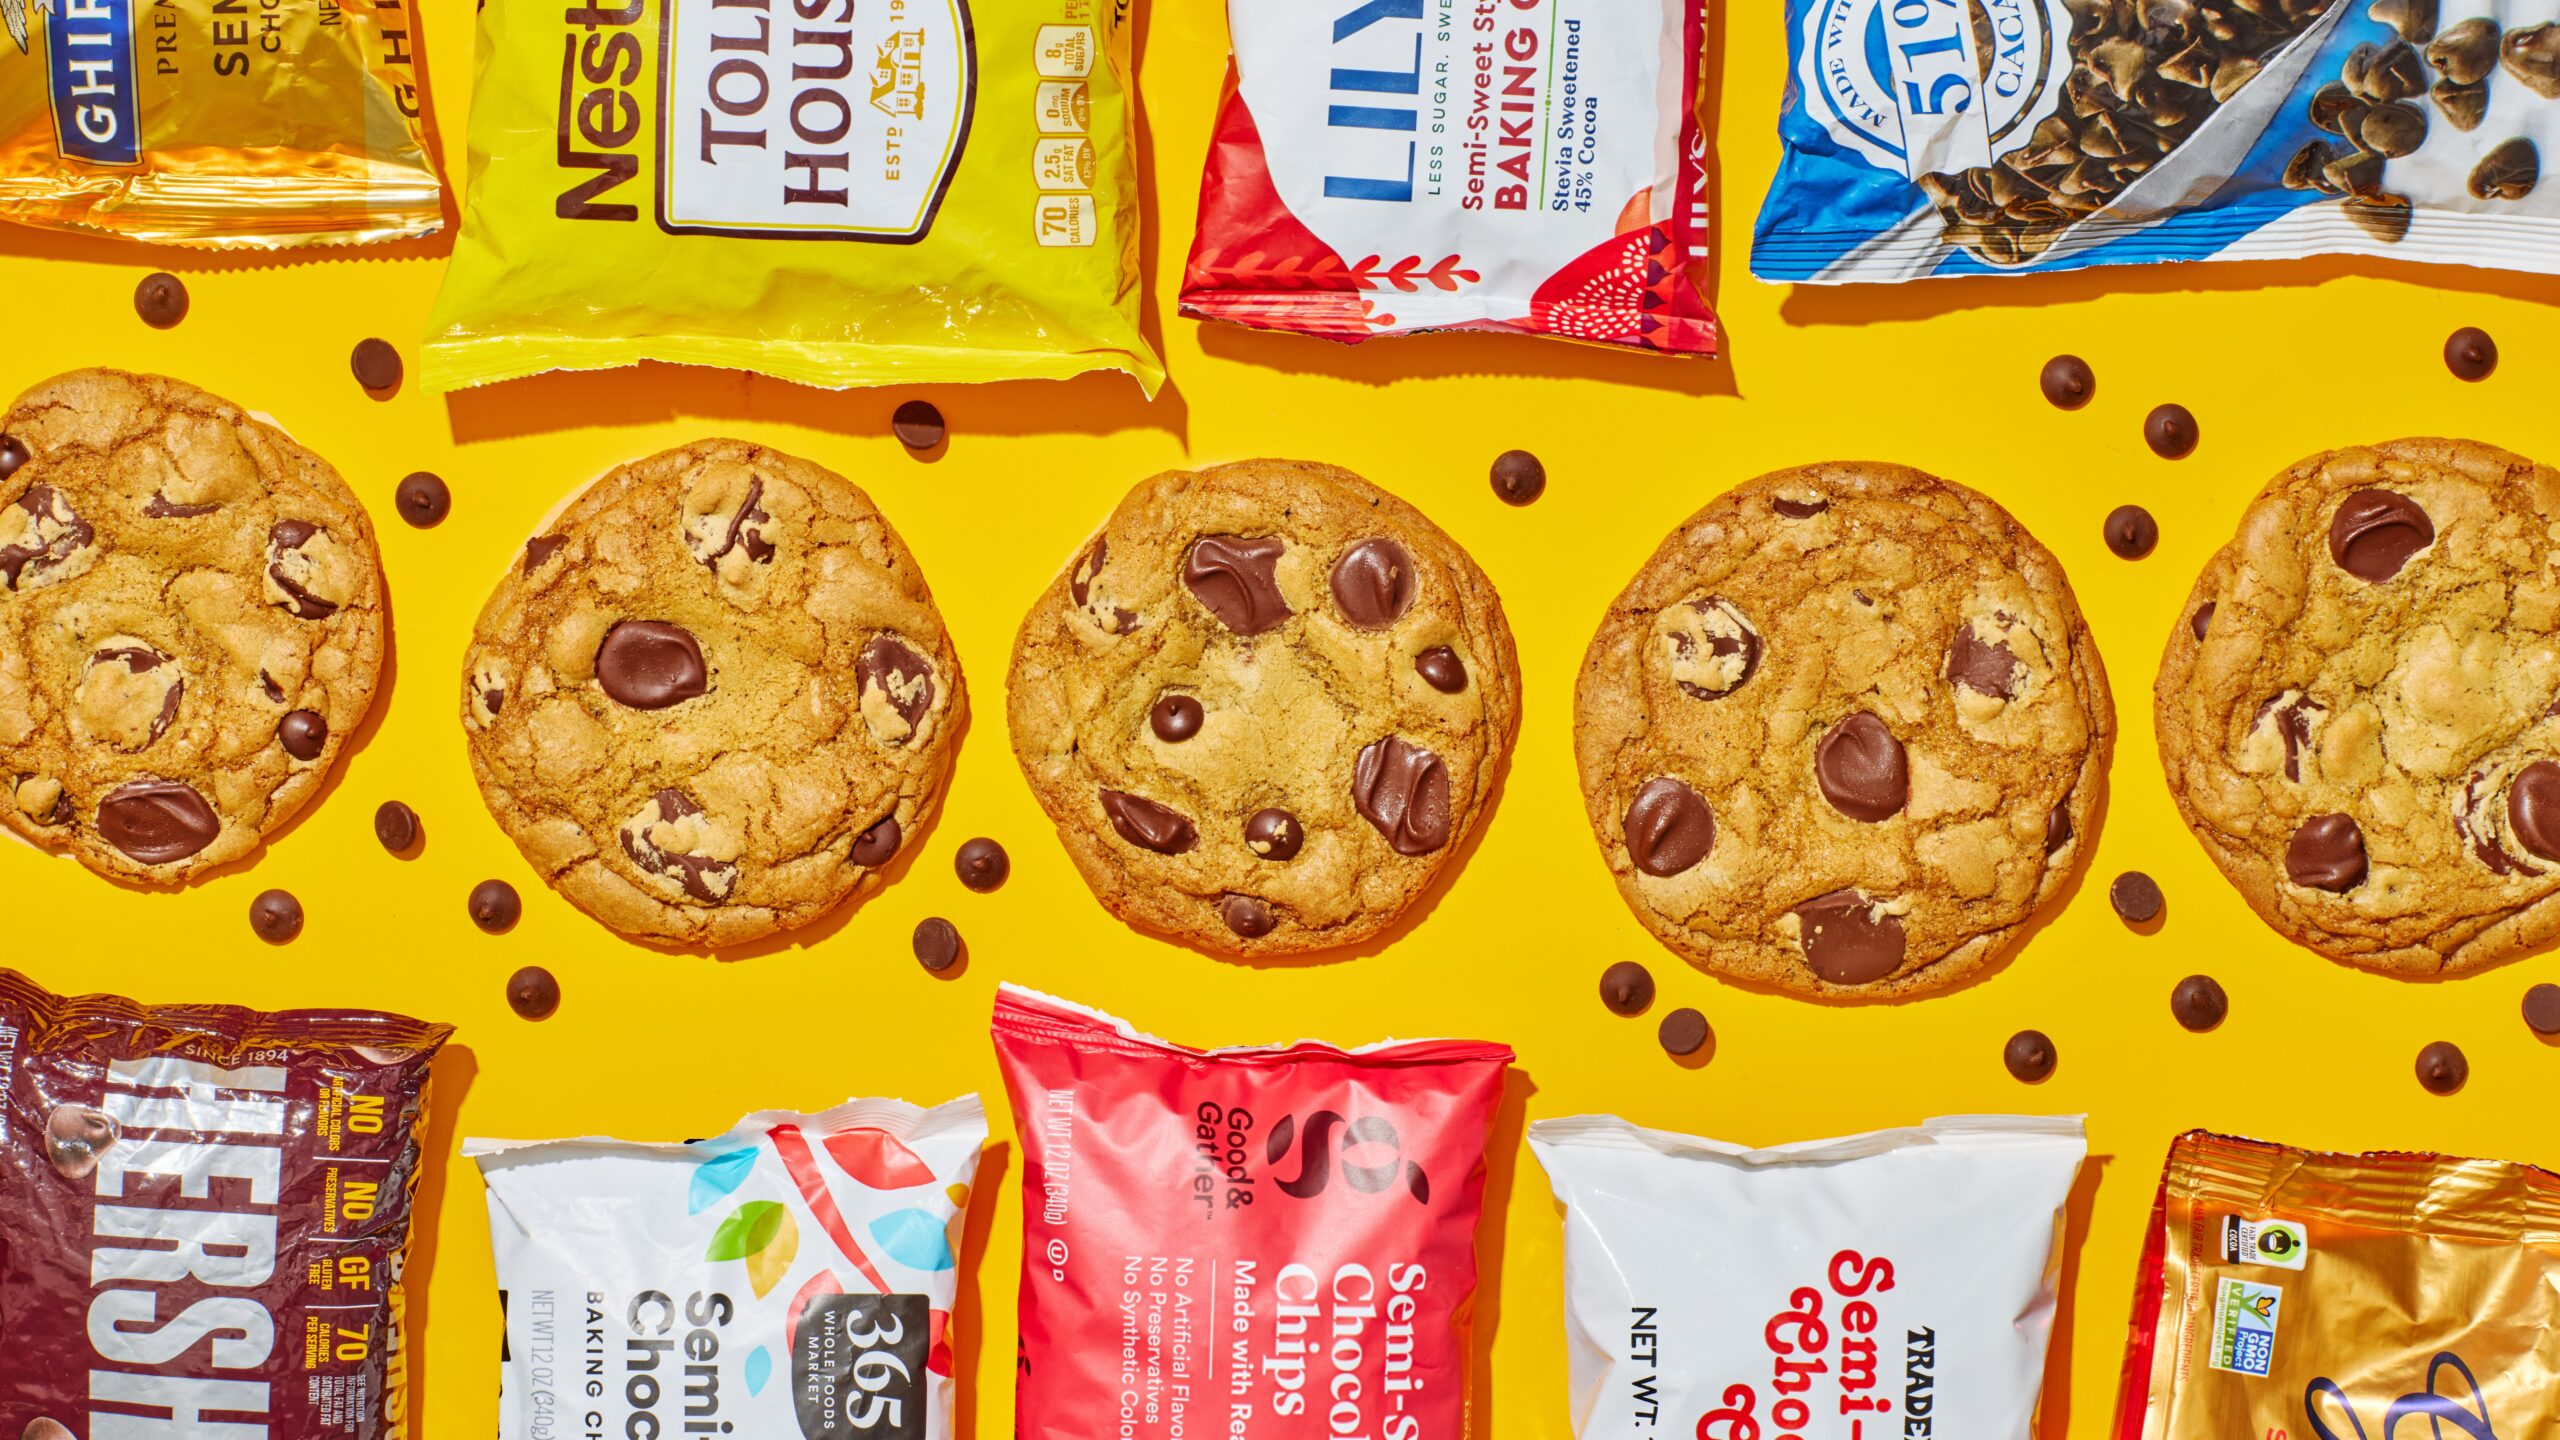 The Best Chocolate Chips: A Blind Taste Test